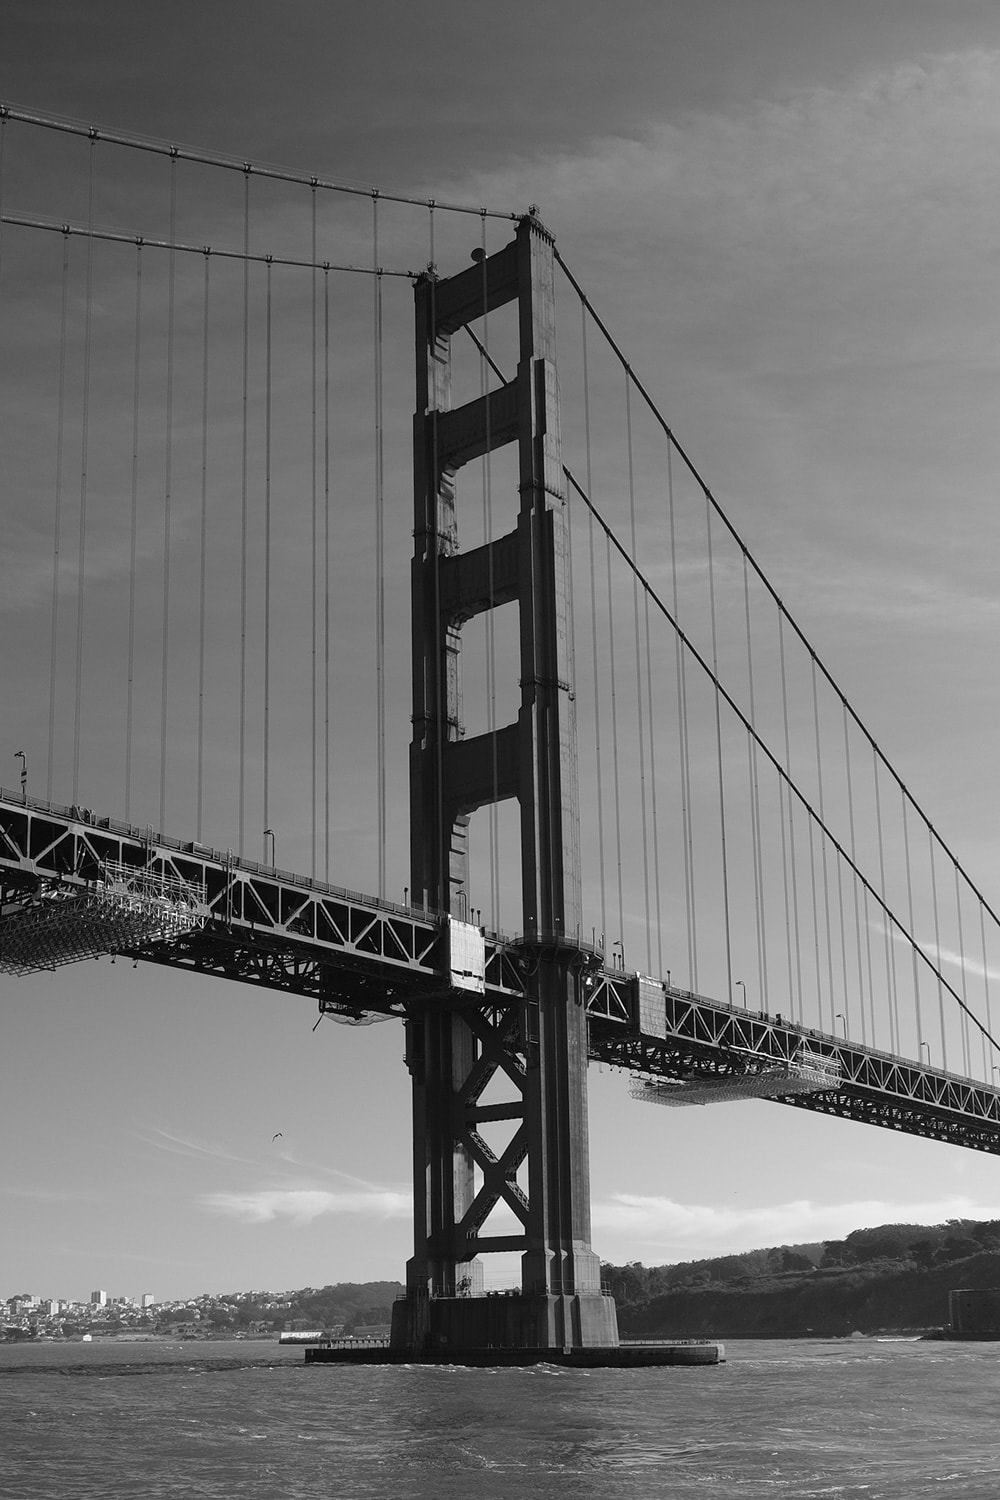 Black and white portrait photo of one of the towers of the Golden Gate Bridge.